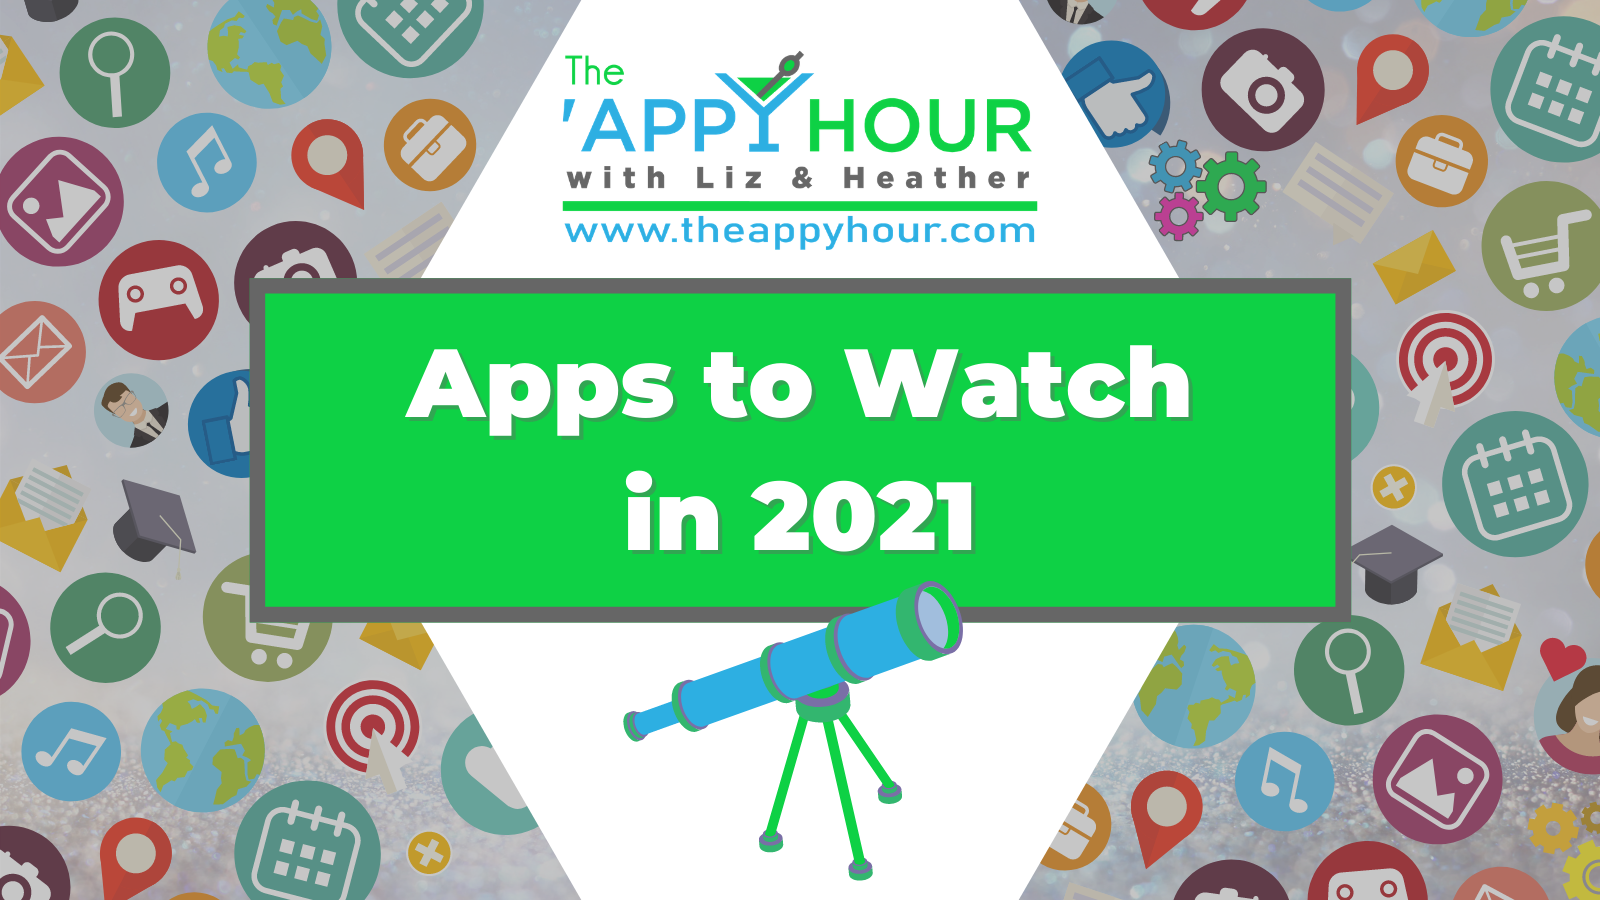 Apps to Watch in 2021